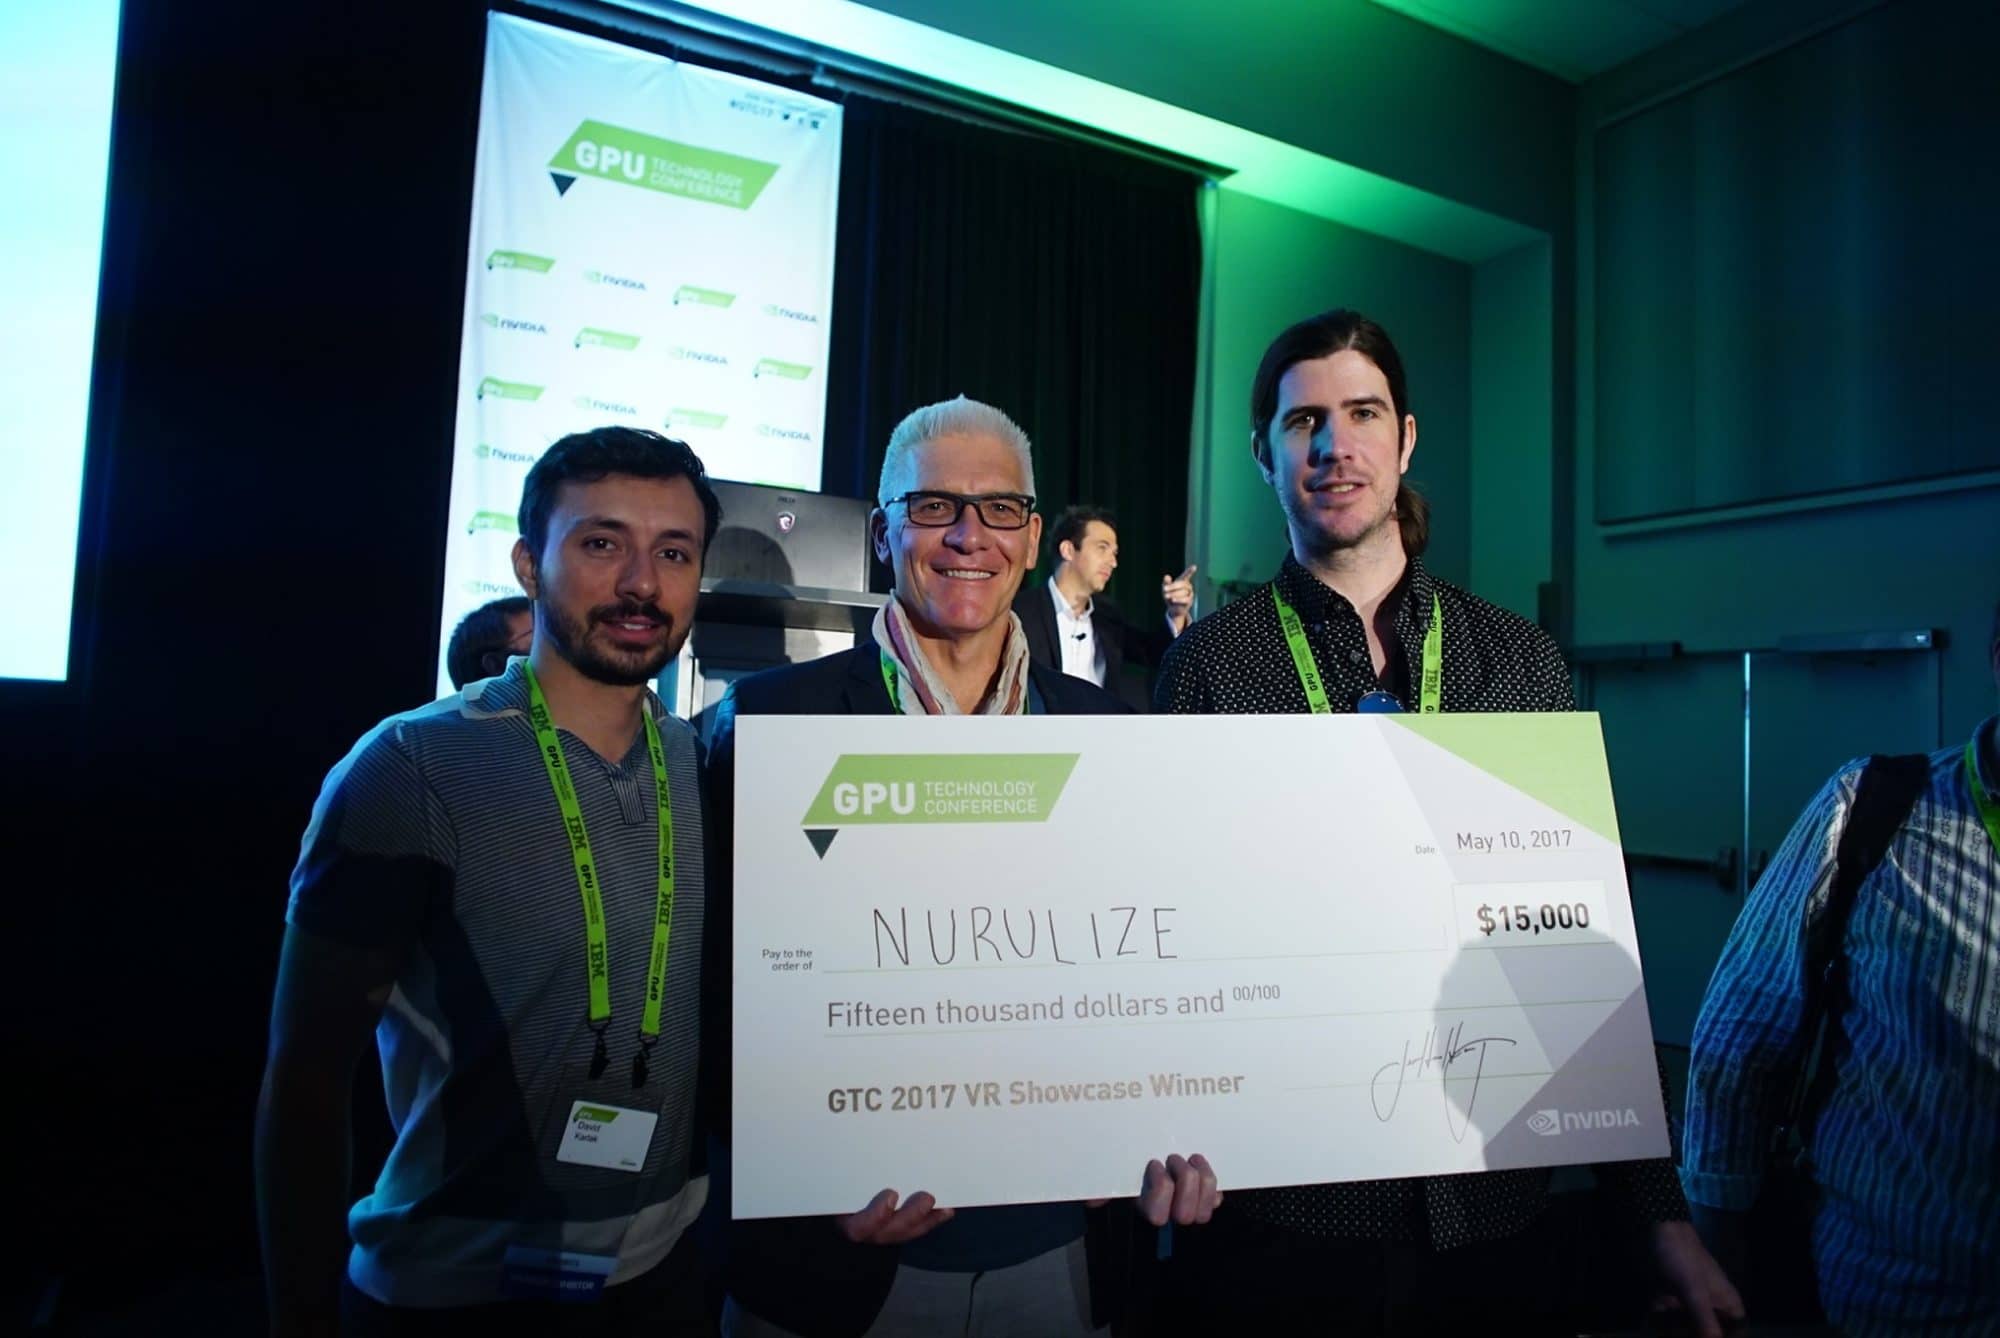 Nurulize founders accept their VR Content Showcase award.